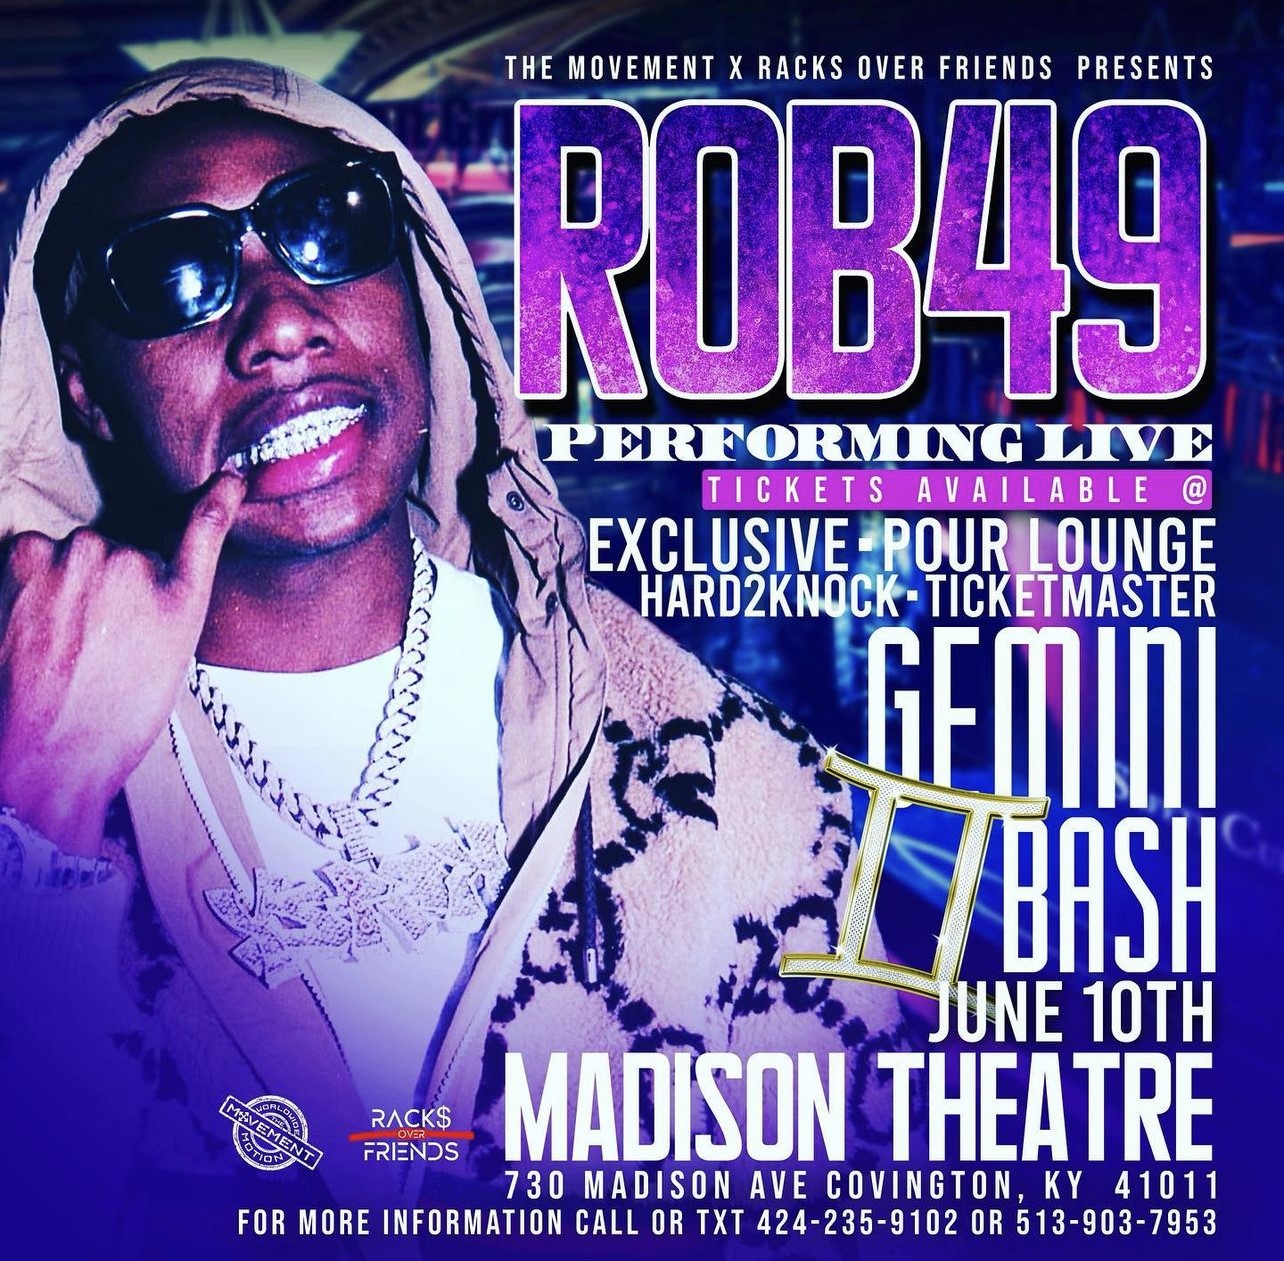 ROB 49 LIVE COVINGTON, KENTUCKY on Jun 10, 21:00@MADISON THEATRE - Pick a seat, Buy tickets and Get information on TICKETS tickets.bhglabel.com